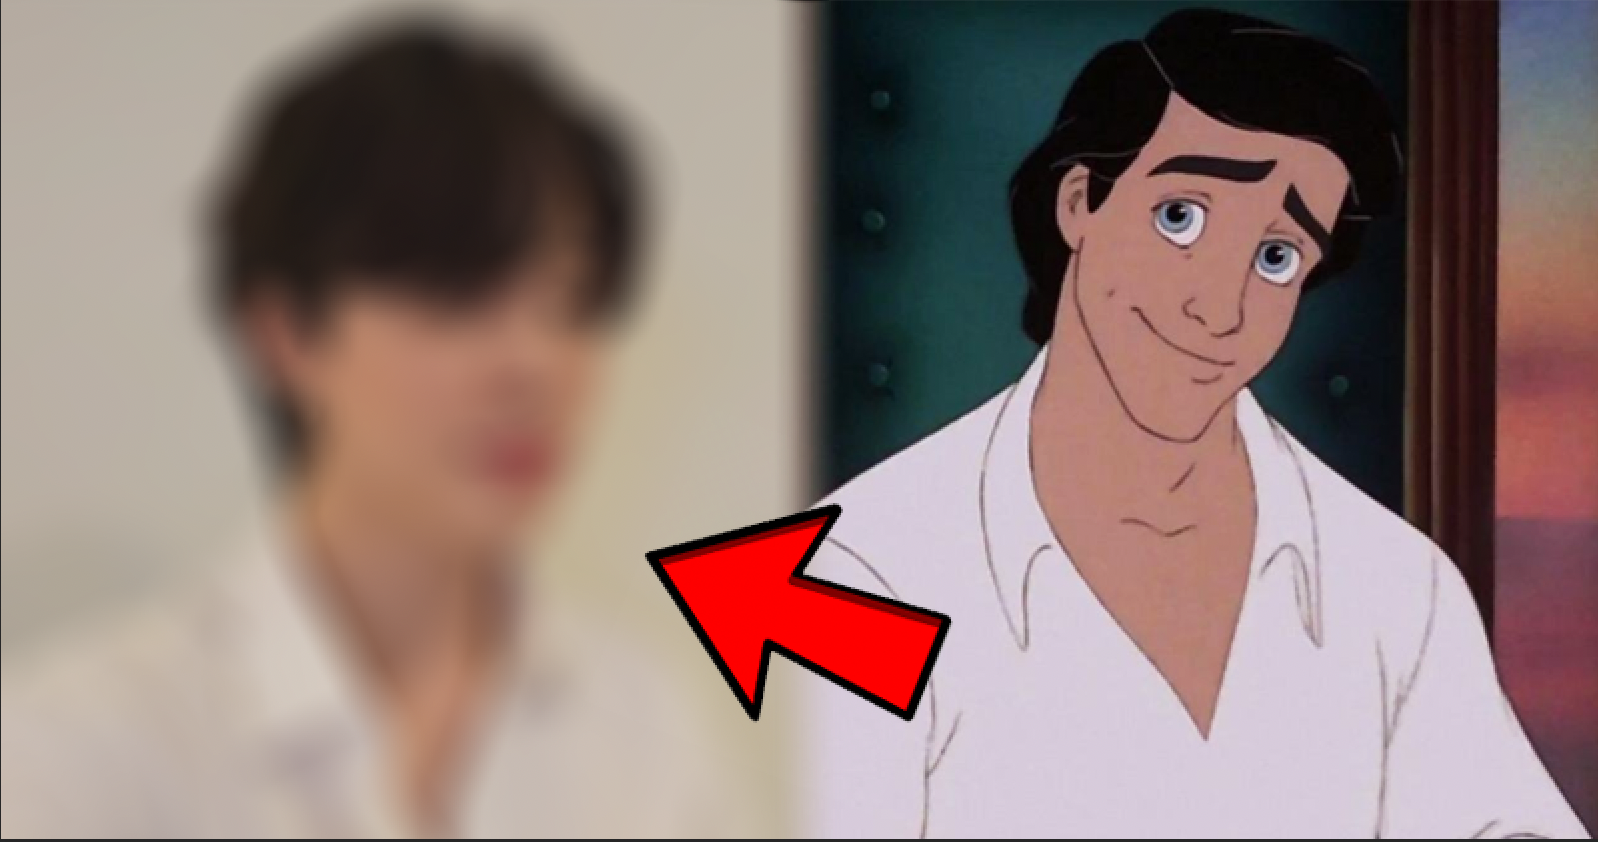 BTS Jimin Makes The Internet Swoon for Looking Like 'Prince Eric'